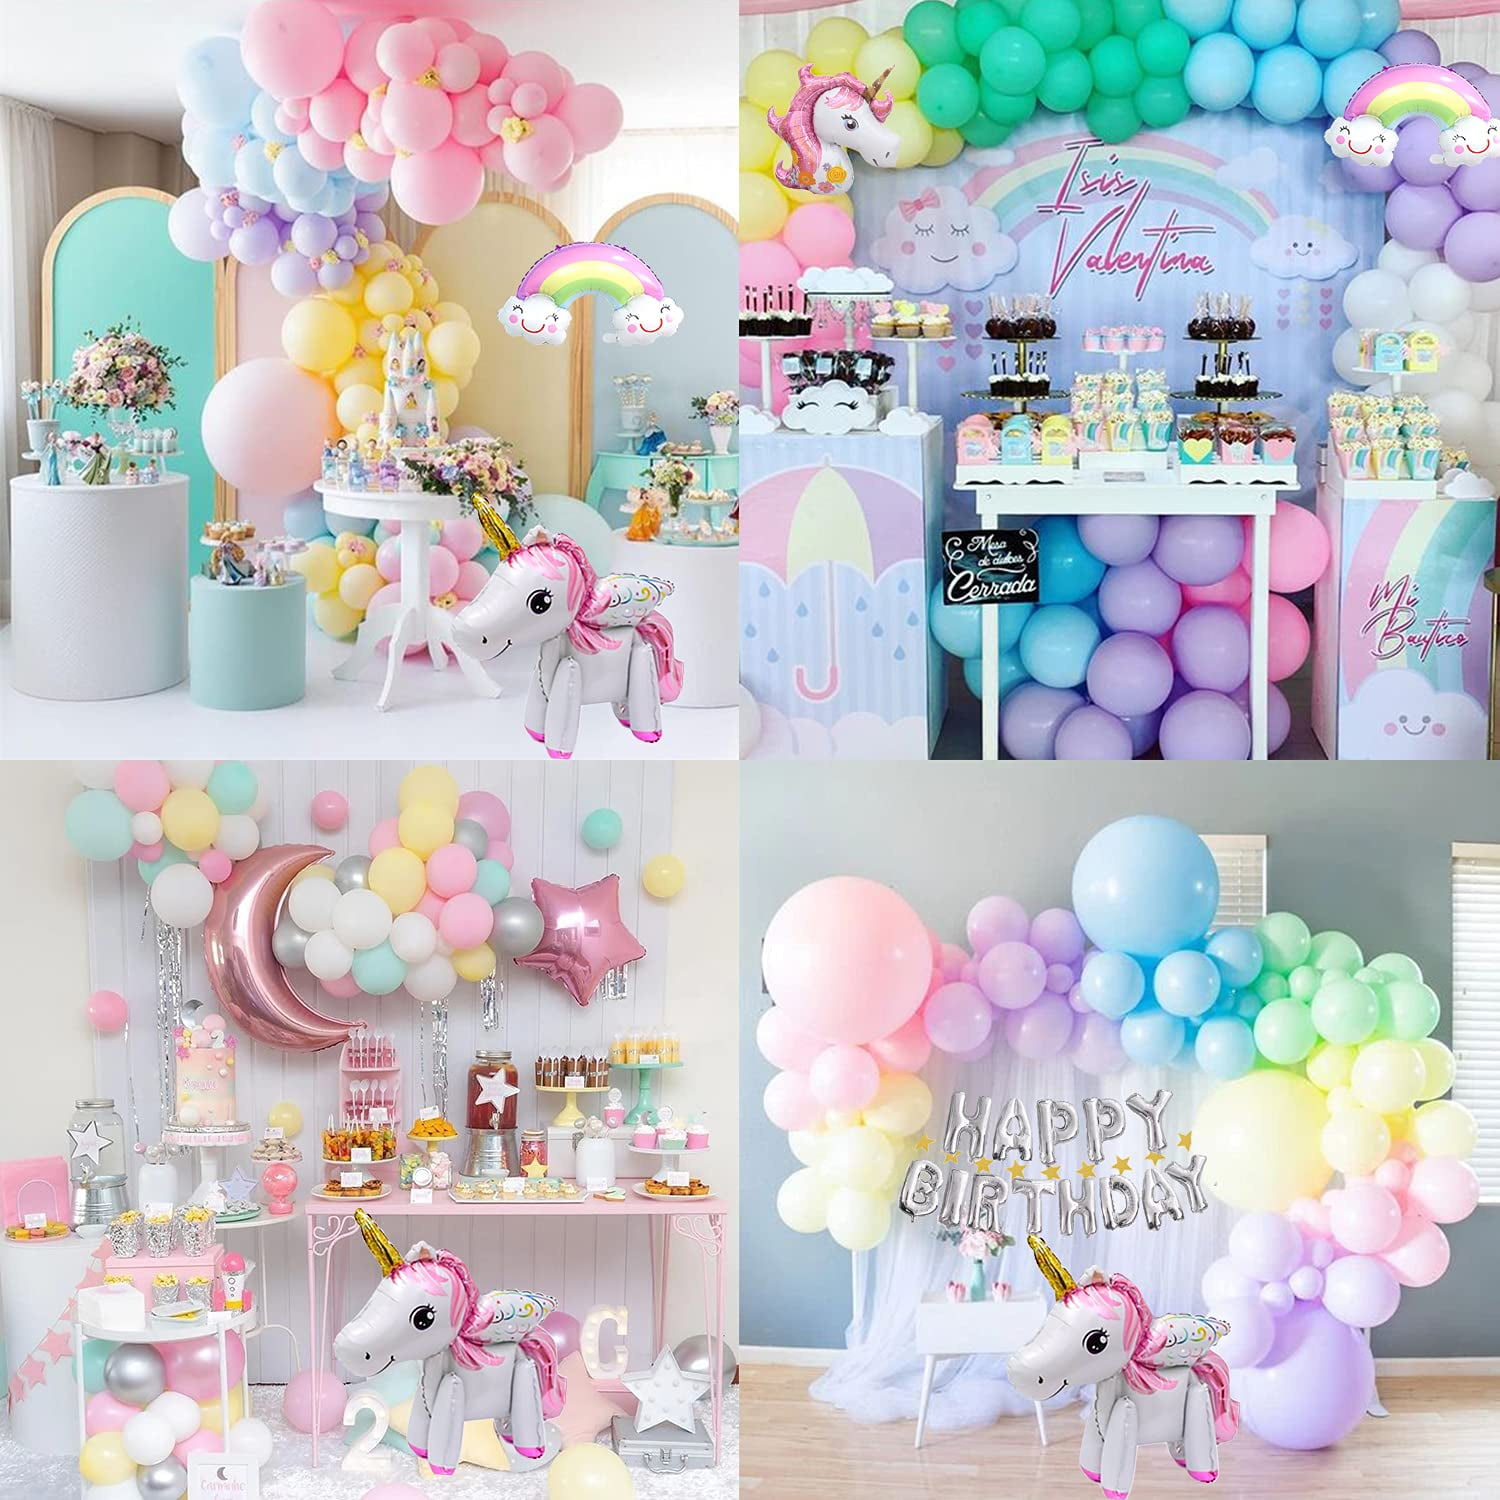 AYUQI 42pcs Unicorn Themed Birthday Decorations Party Supplies for Baby  Shower Birthday Party Wedding Party 